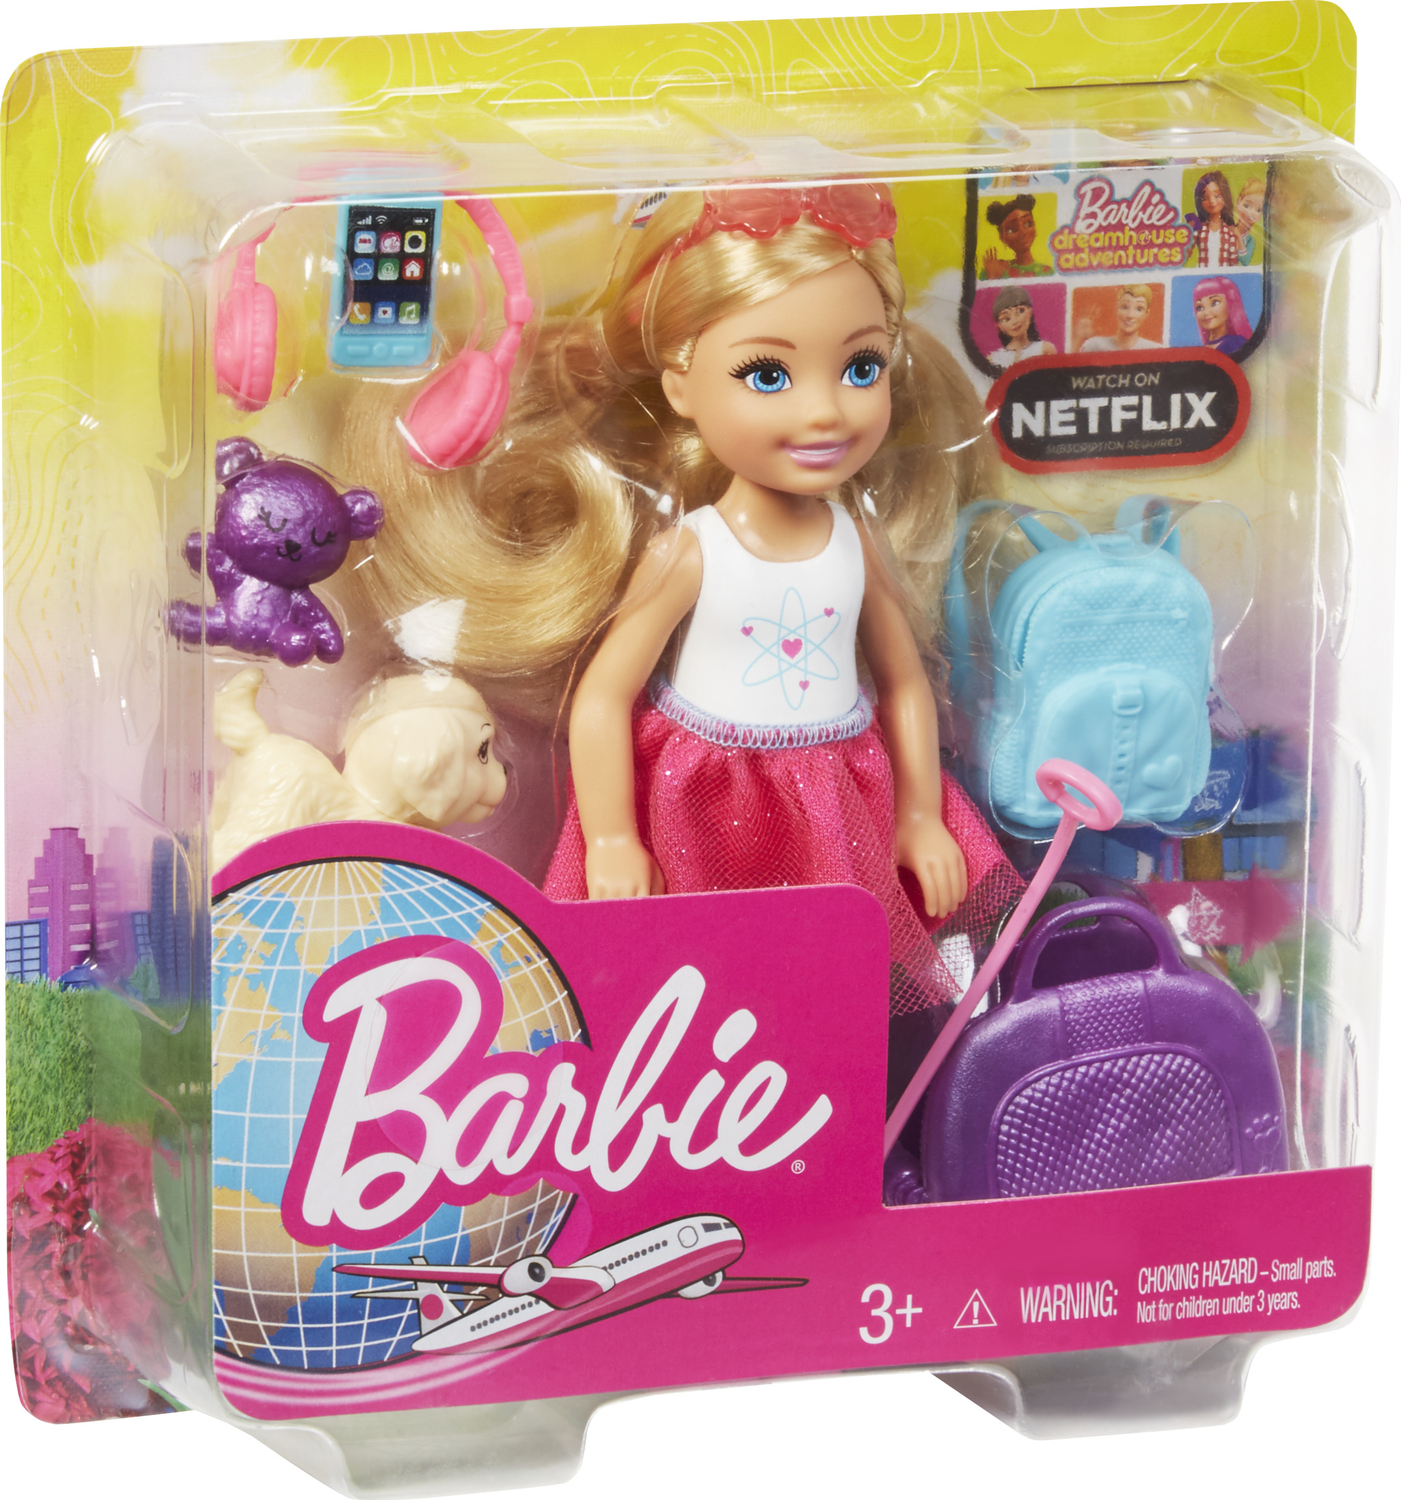 Girl's Barbie Dreamhouse Adventures Travel Doll & Accessories